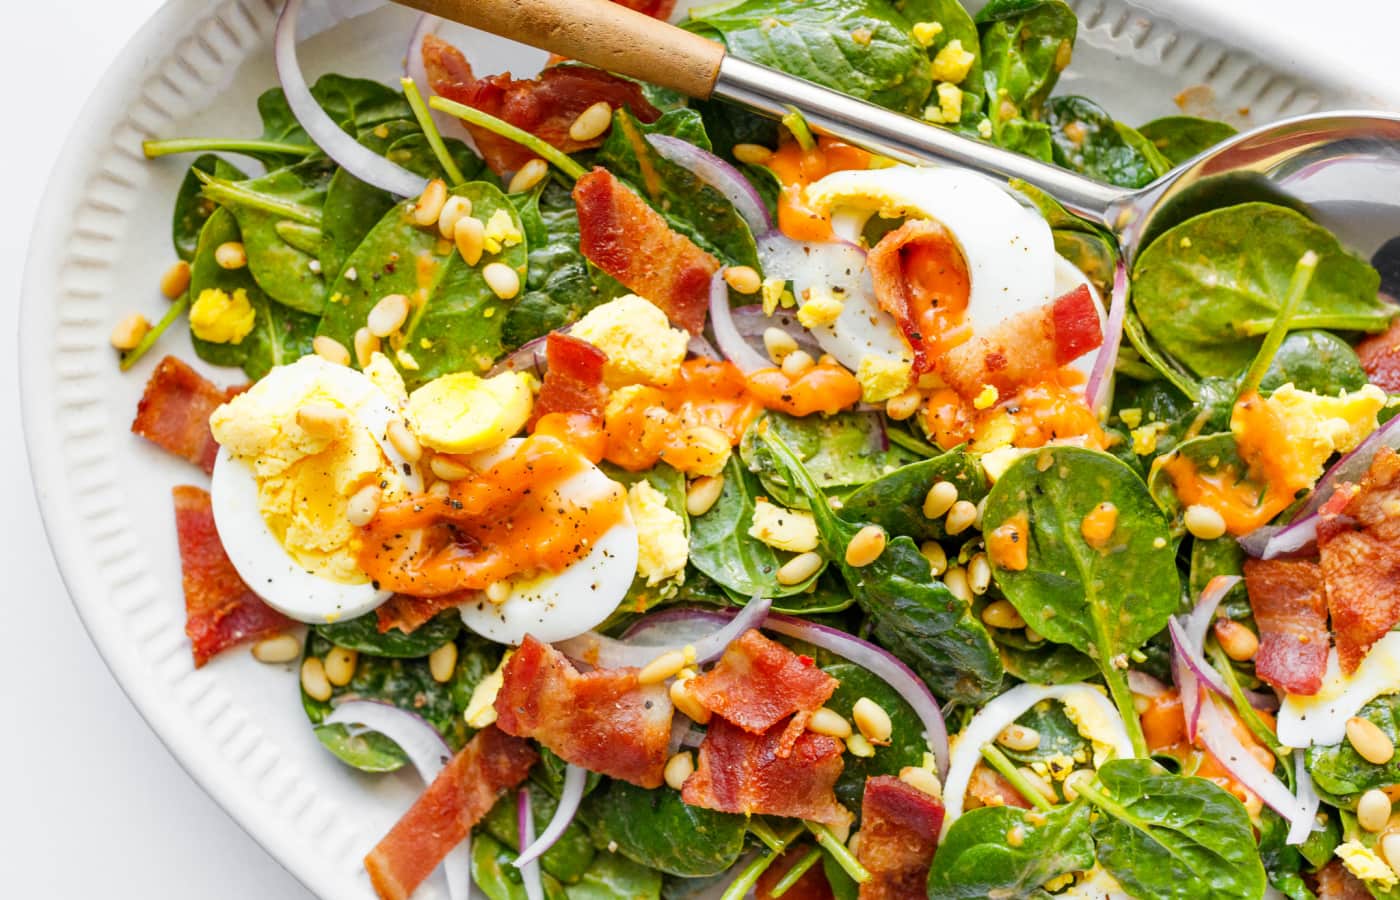 https://reluctantentertainer.com/wp-content/uploads/2021/03/Spinach-Salad-with-Warm-dressing.jpeg